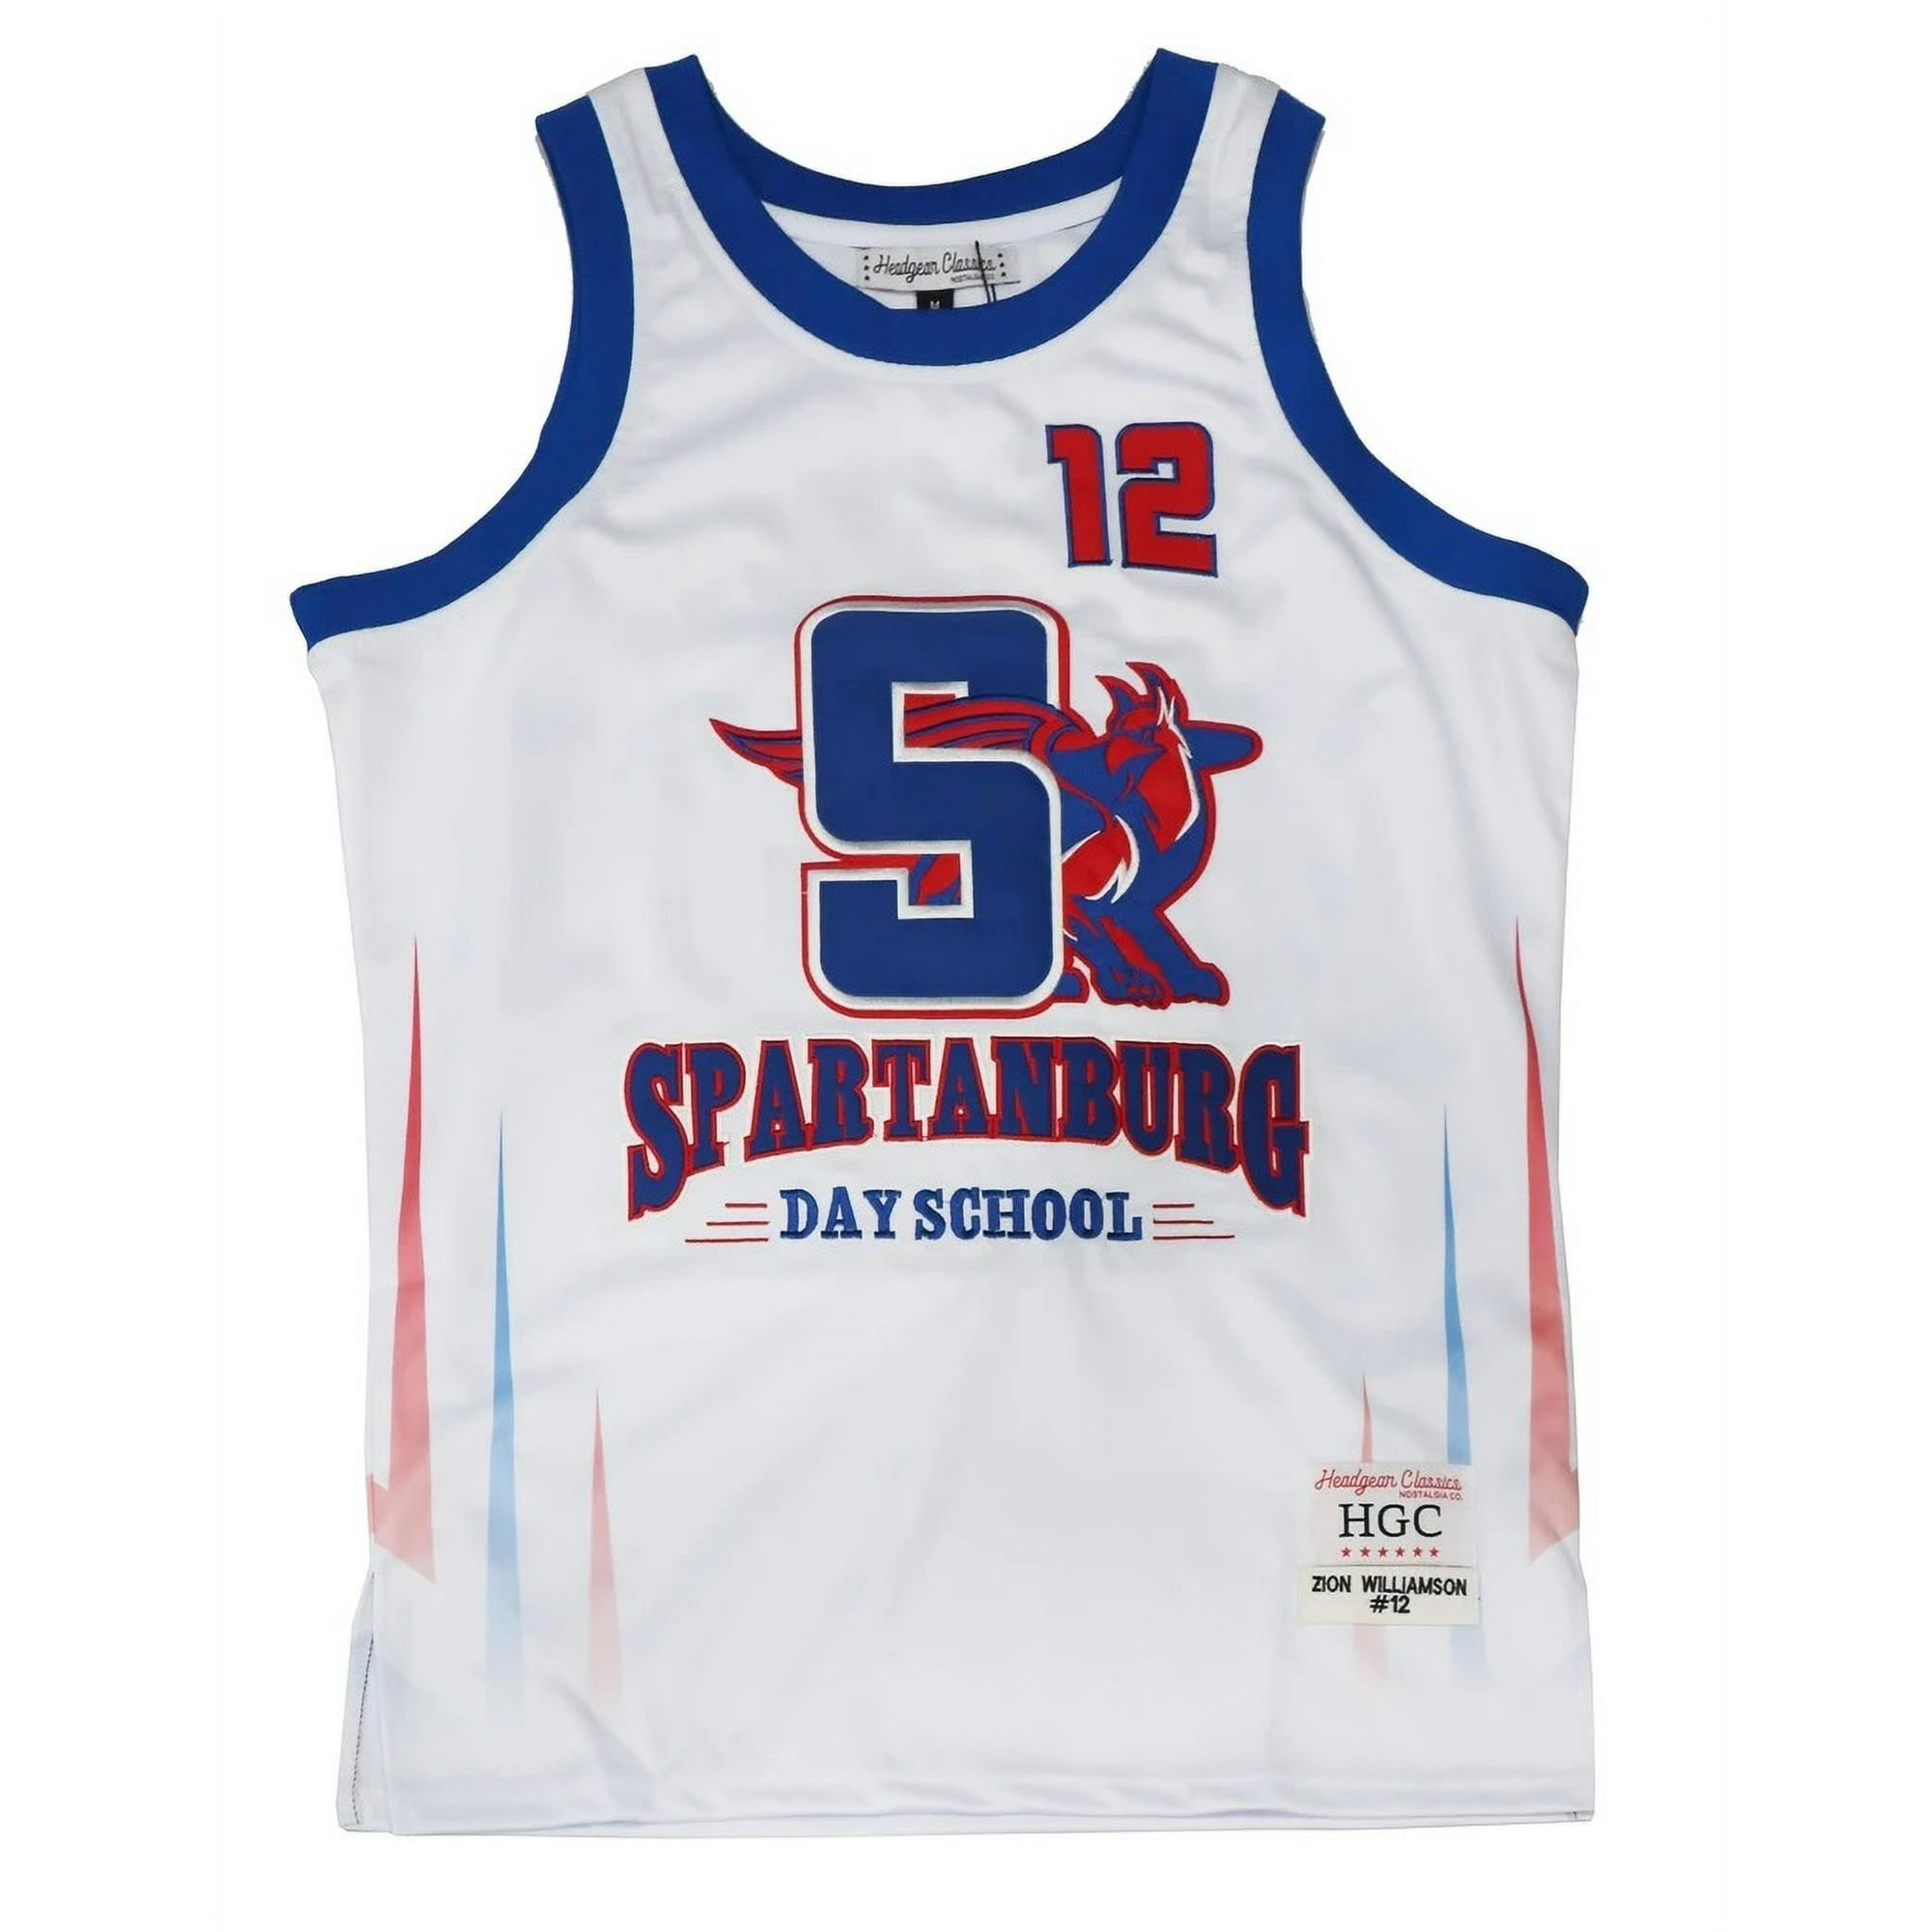 Zion Williamson's jersey has become a hot seller. His high school jersey,  that is. - The Washington Post